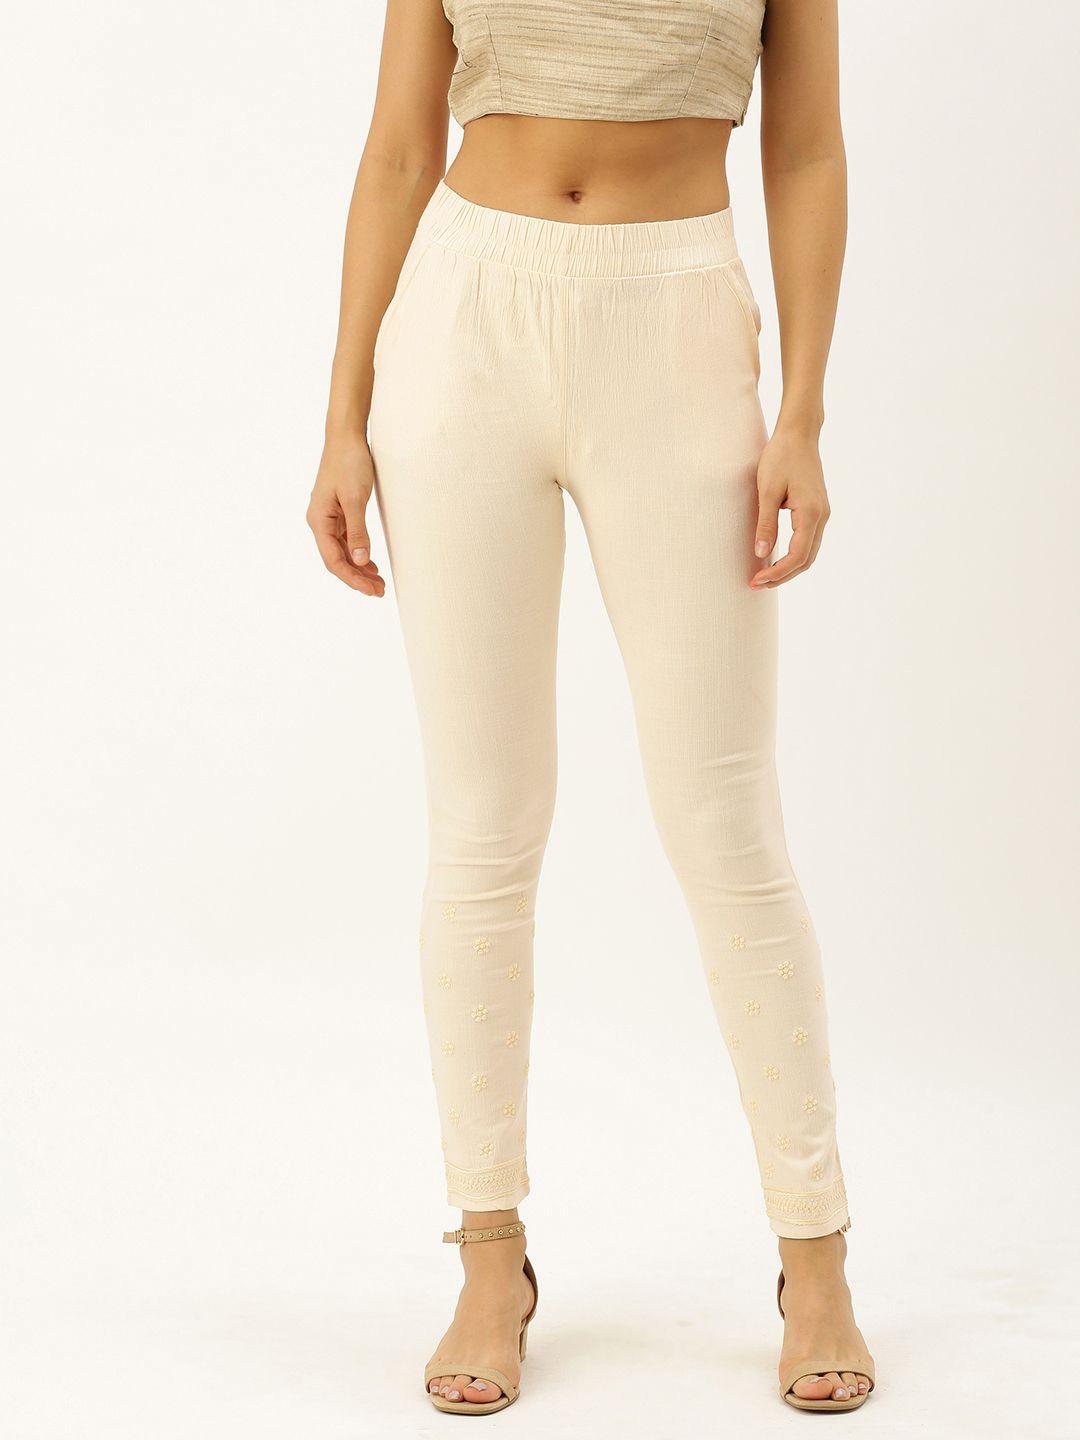 soch-women-off-white-regular-fit-embroidered-regular-trousers